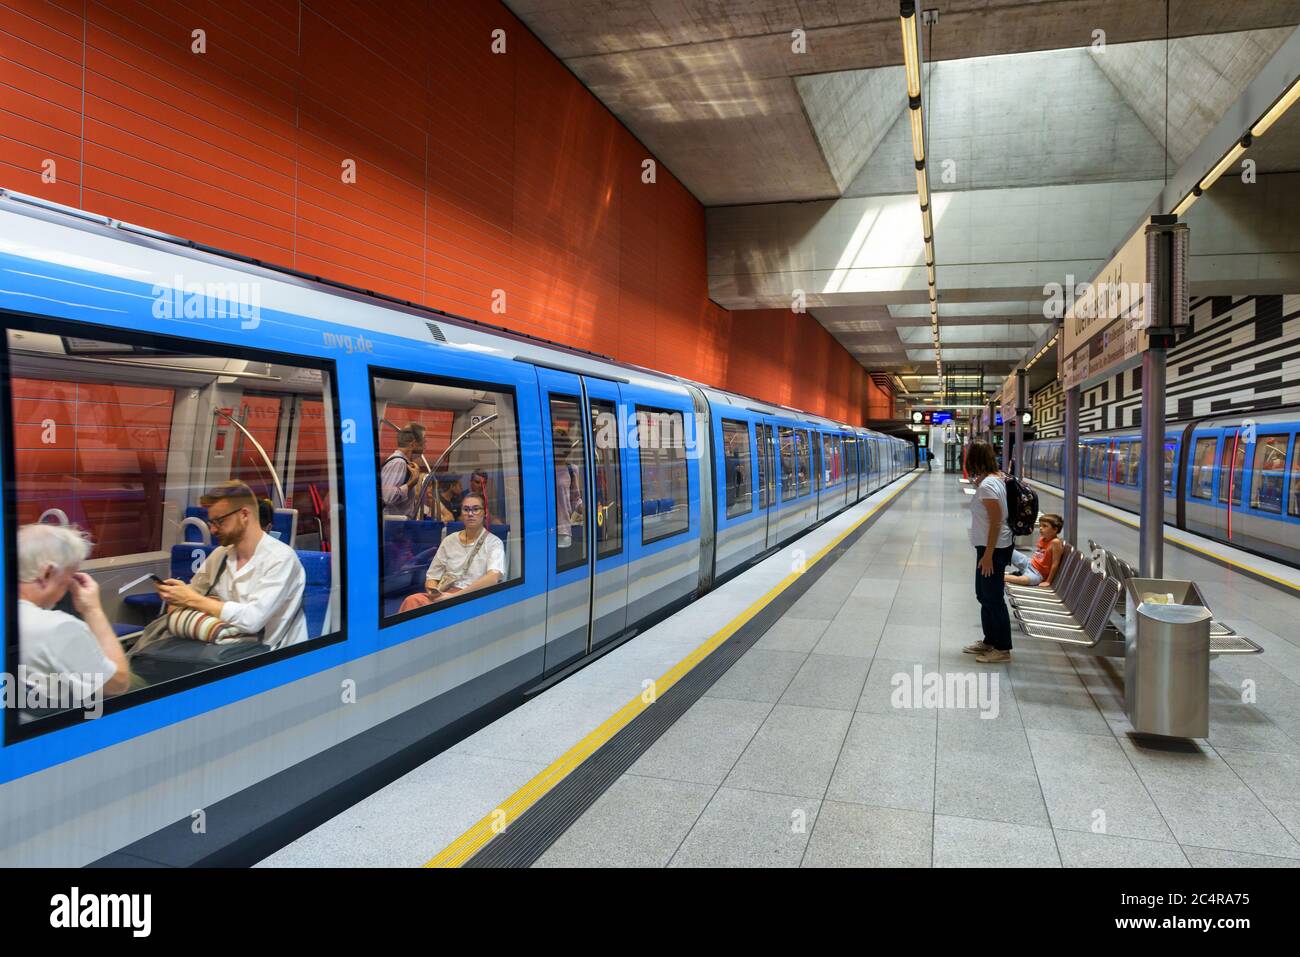 Munich, Germany - Aug 2, 2019: Inside the metro station in Munich. Train with passengers in modern subway. Panoramic view of platform of urban undergr Stock Photo